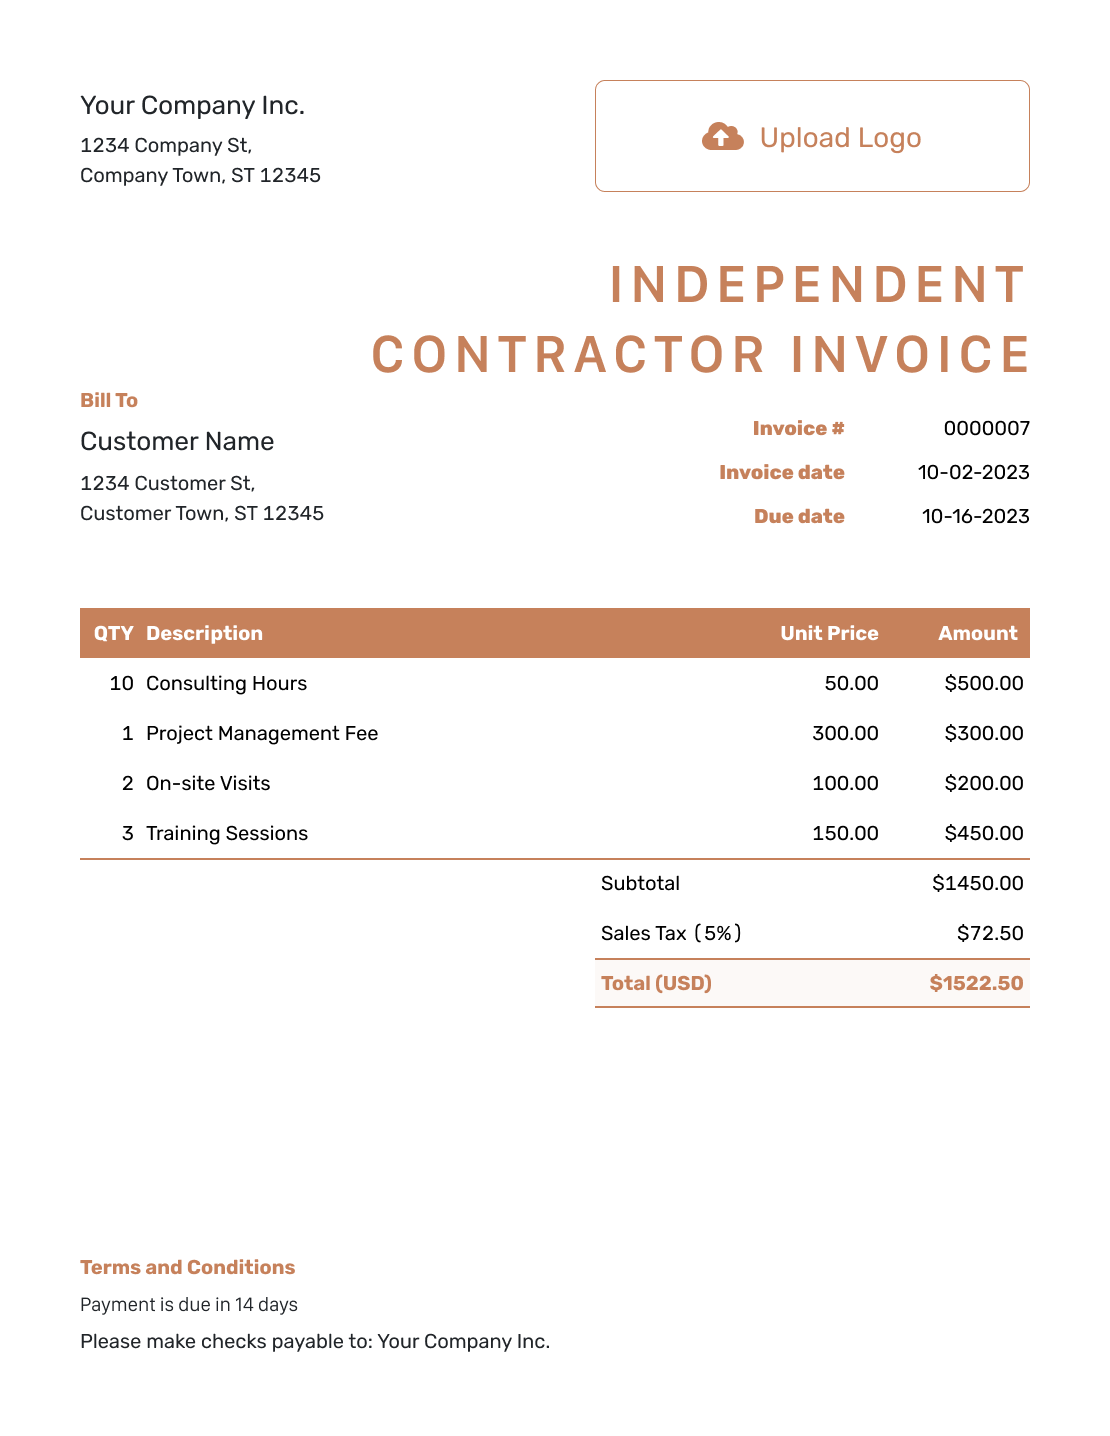 Standard Independent Contractor Invoice Template